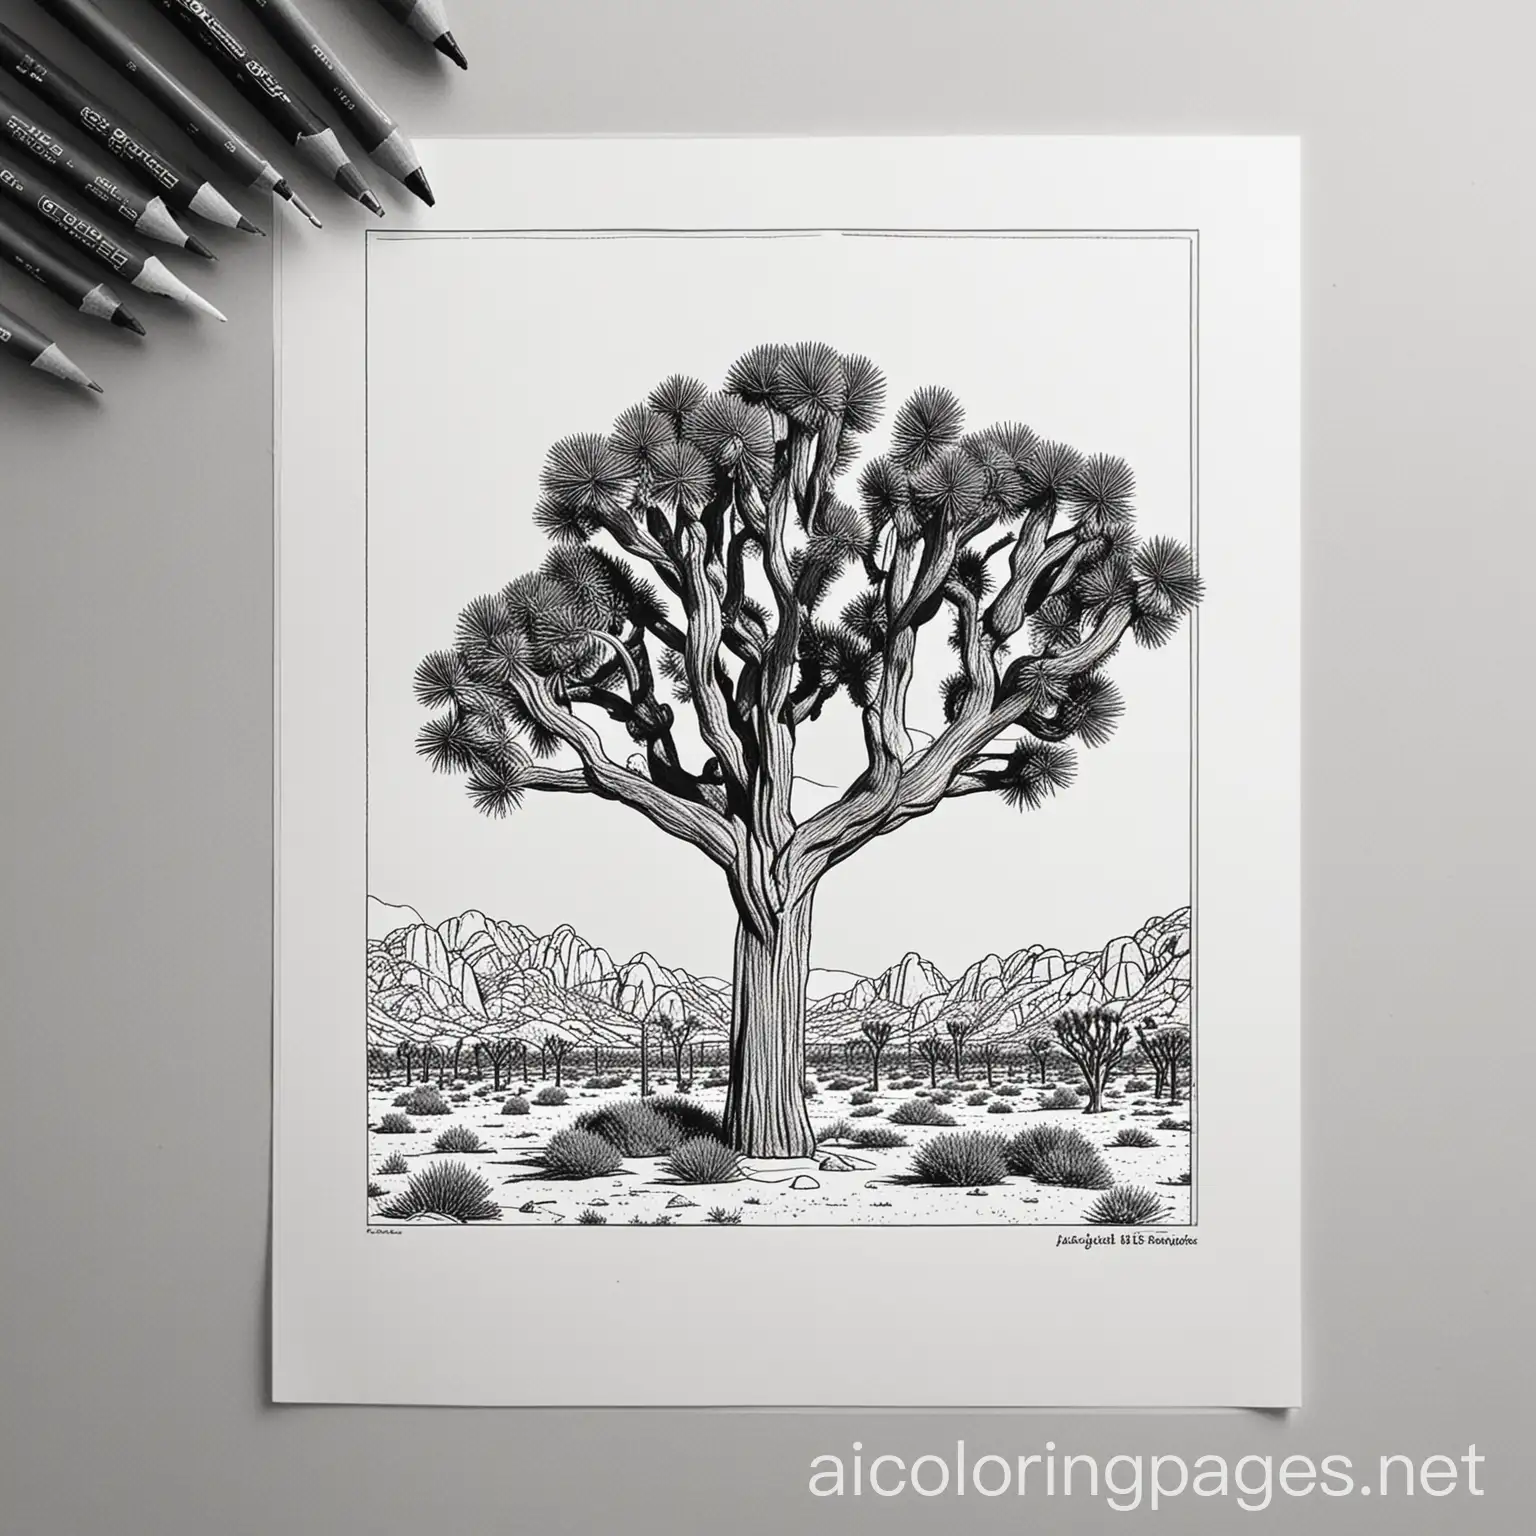 I need a coloring page of Joshua tree national park, Coloring Page, black and white, line art, white background, Simplicity, Ample White Space. The background of the coloring page is plain white to make it easy for young children to color within the lines. The outlines of all the subjects are easy to distinguish, making it simple for kids to color without too much difficulty